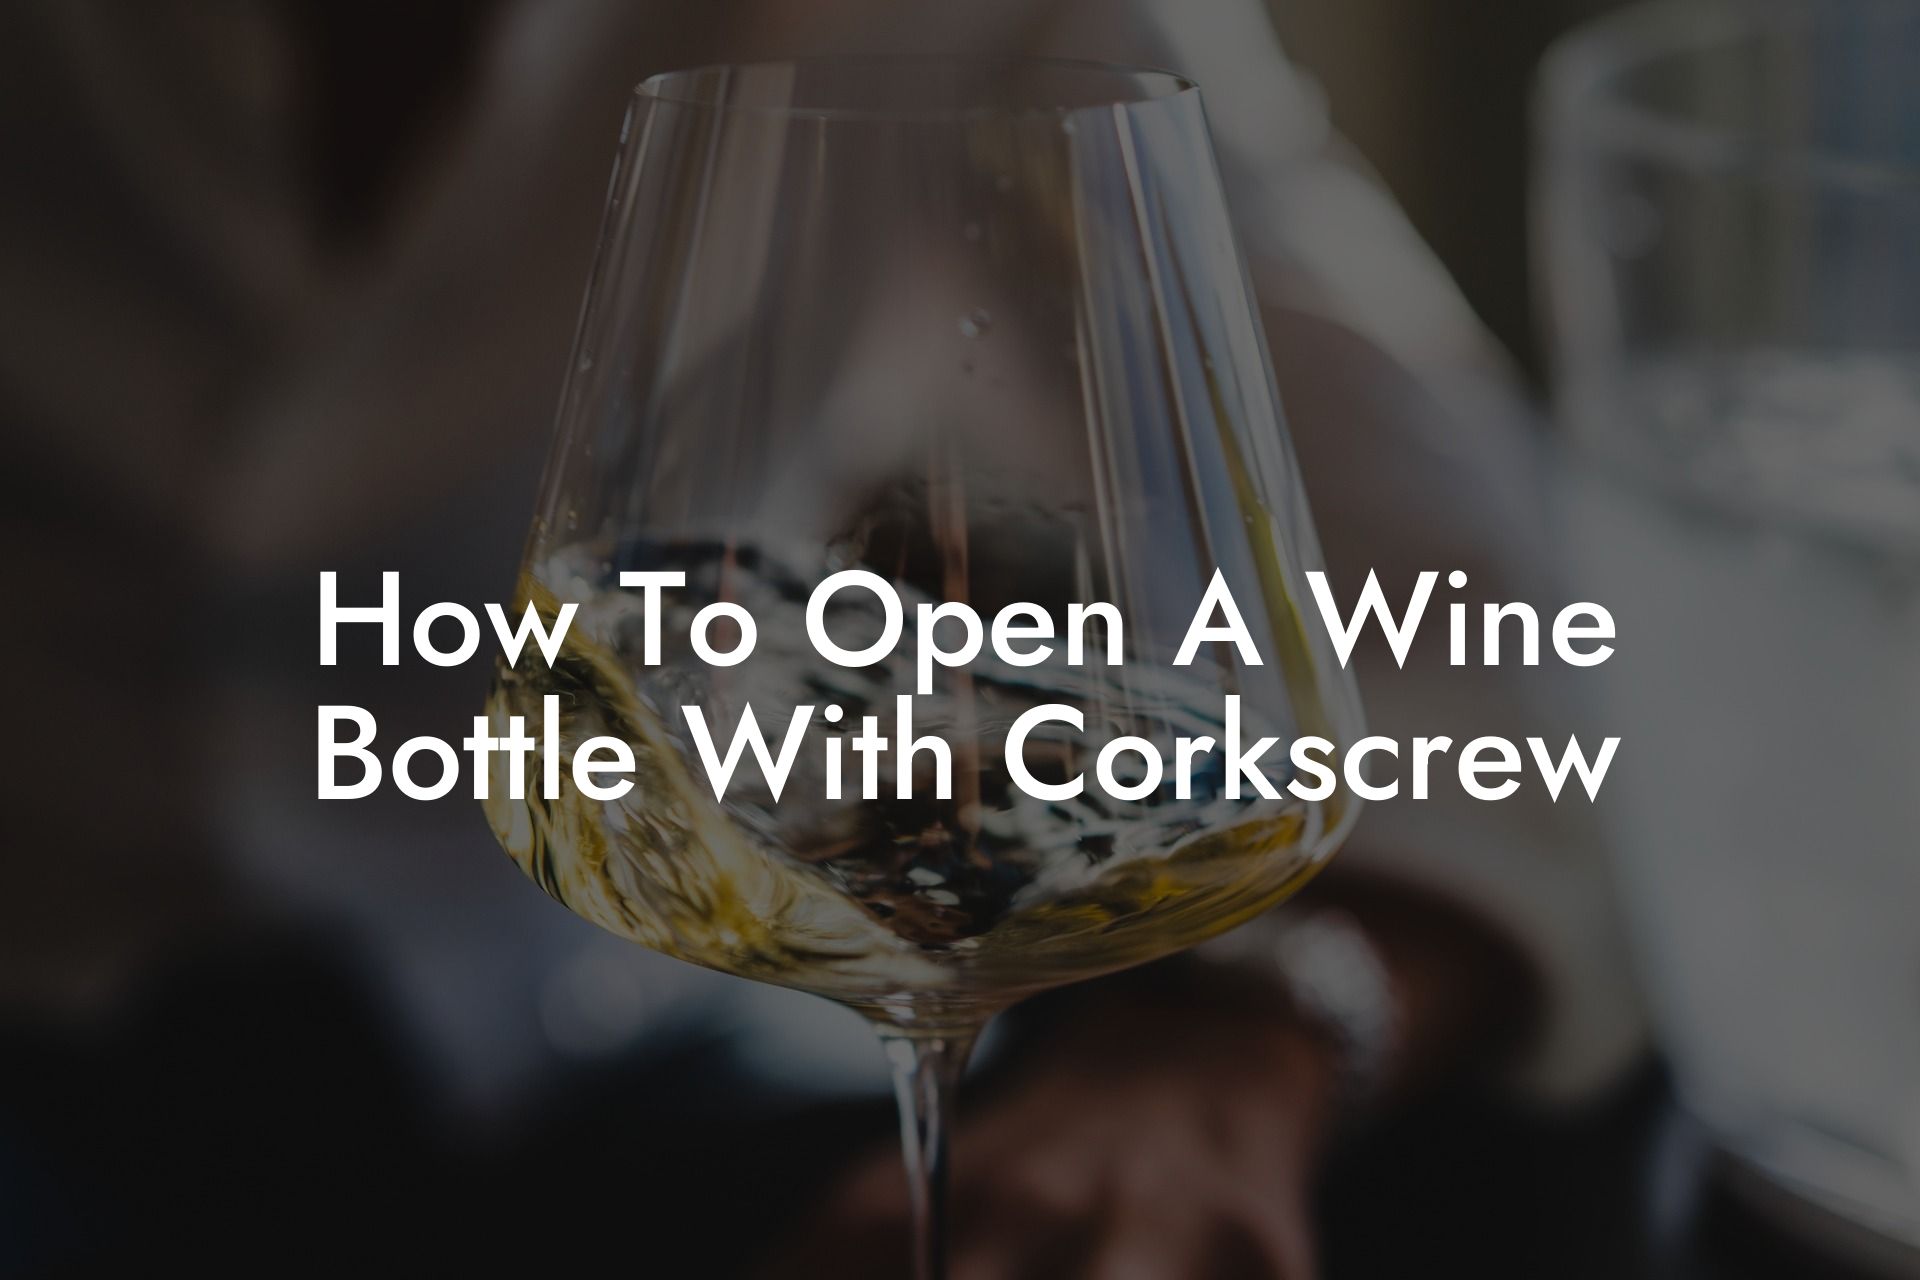 How To Open A Wine Bottle With Corkscrew